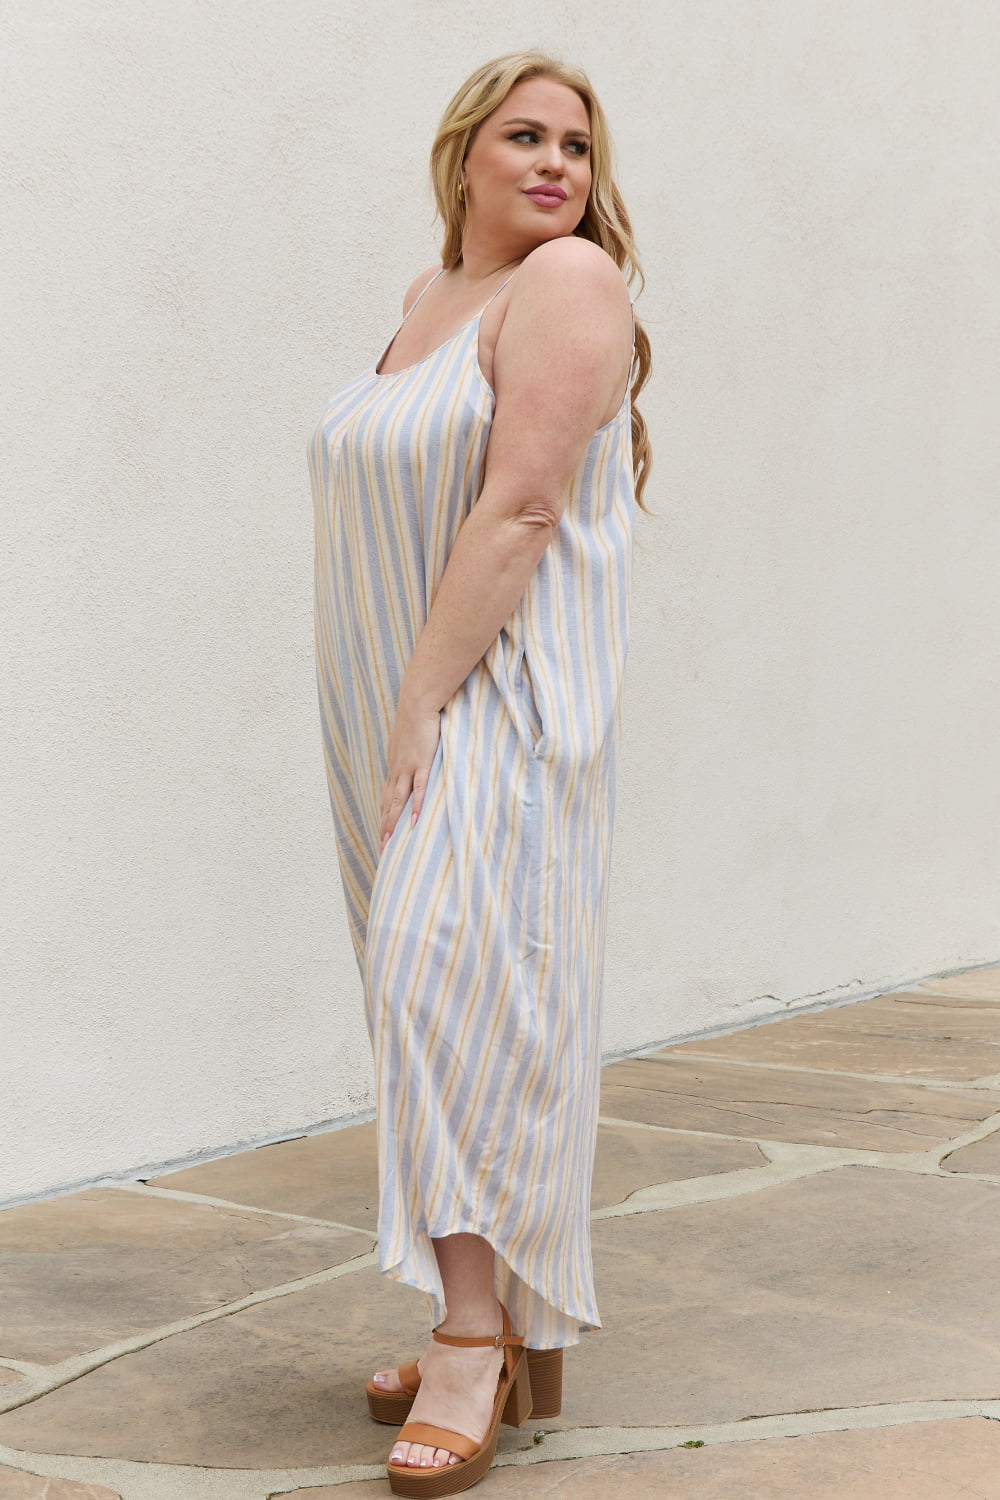 HEYSON Multi Color Striped Jumpsuit with Pockets